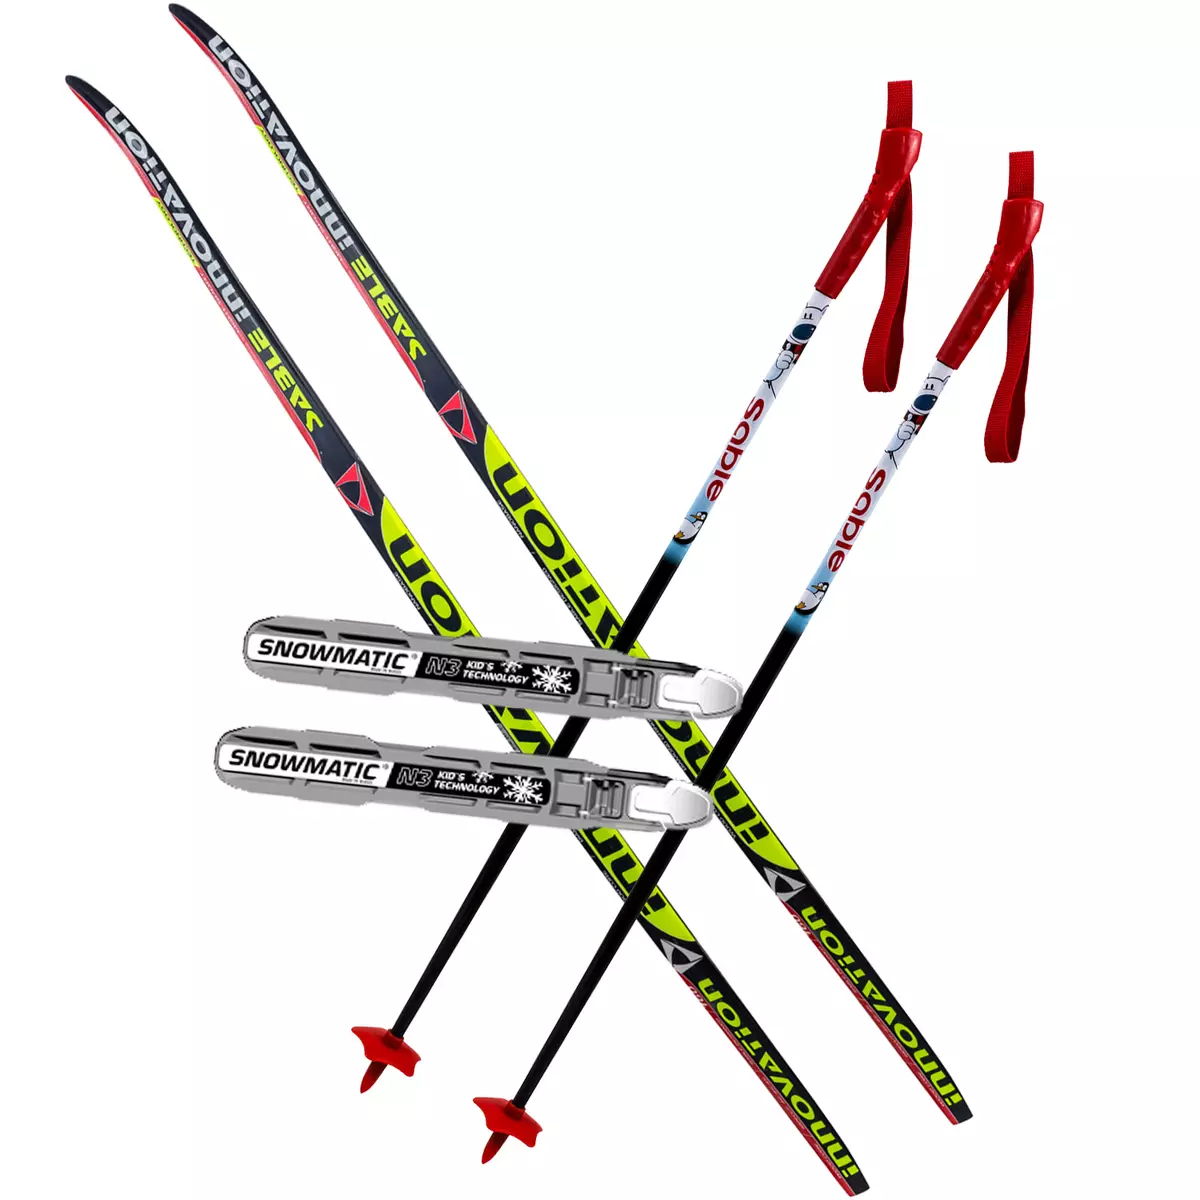 Ski Stc: Running children's plastic skis and others, ski sticks from the manufacturer. Ski kits with cable fastening, review review 20253_7